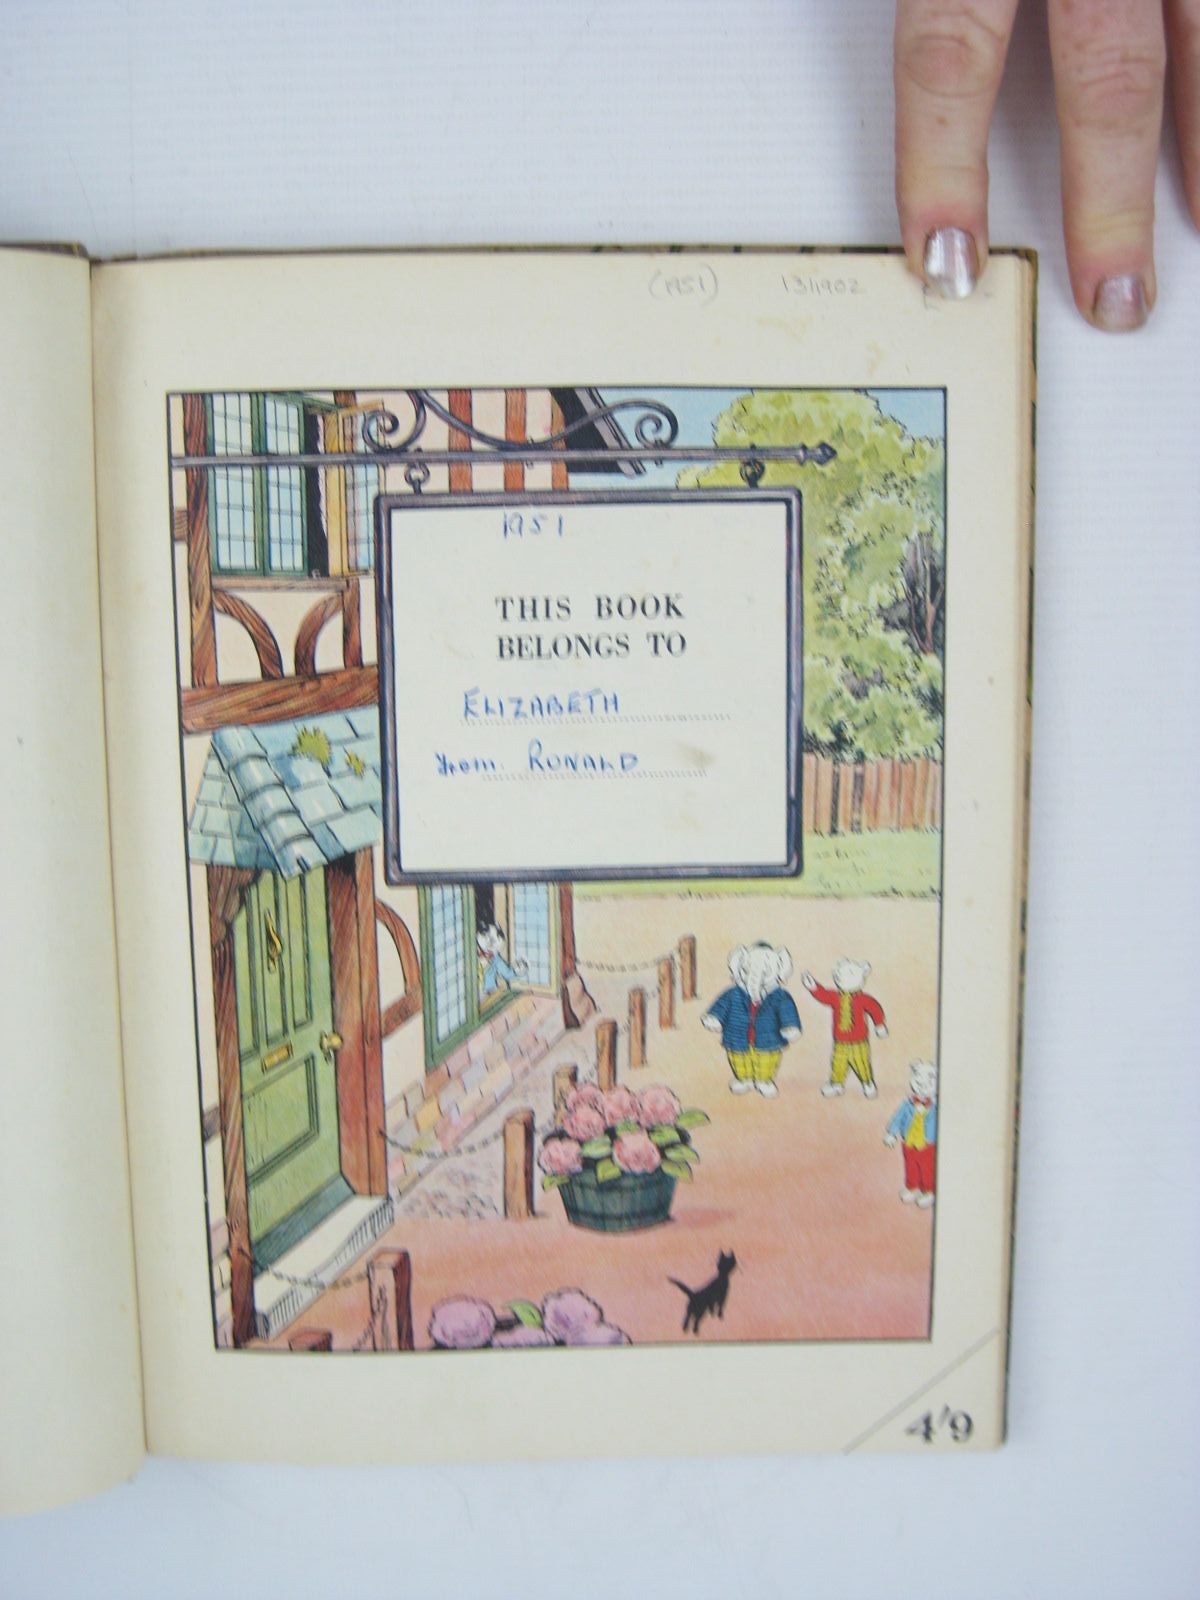 Photo of RUPERT ANNUAL 1951 - THE NEW RUPERT BOOK written by Bestall, Alfred illustrated by Bestall, Alfred published by Daily Express (STOCK CODE: 1311902)  for sale by Stella & Rose's Books